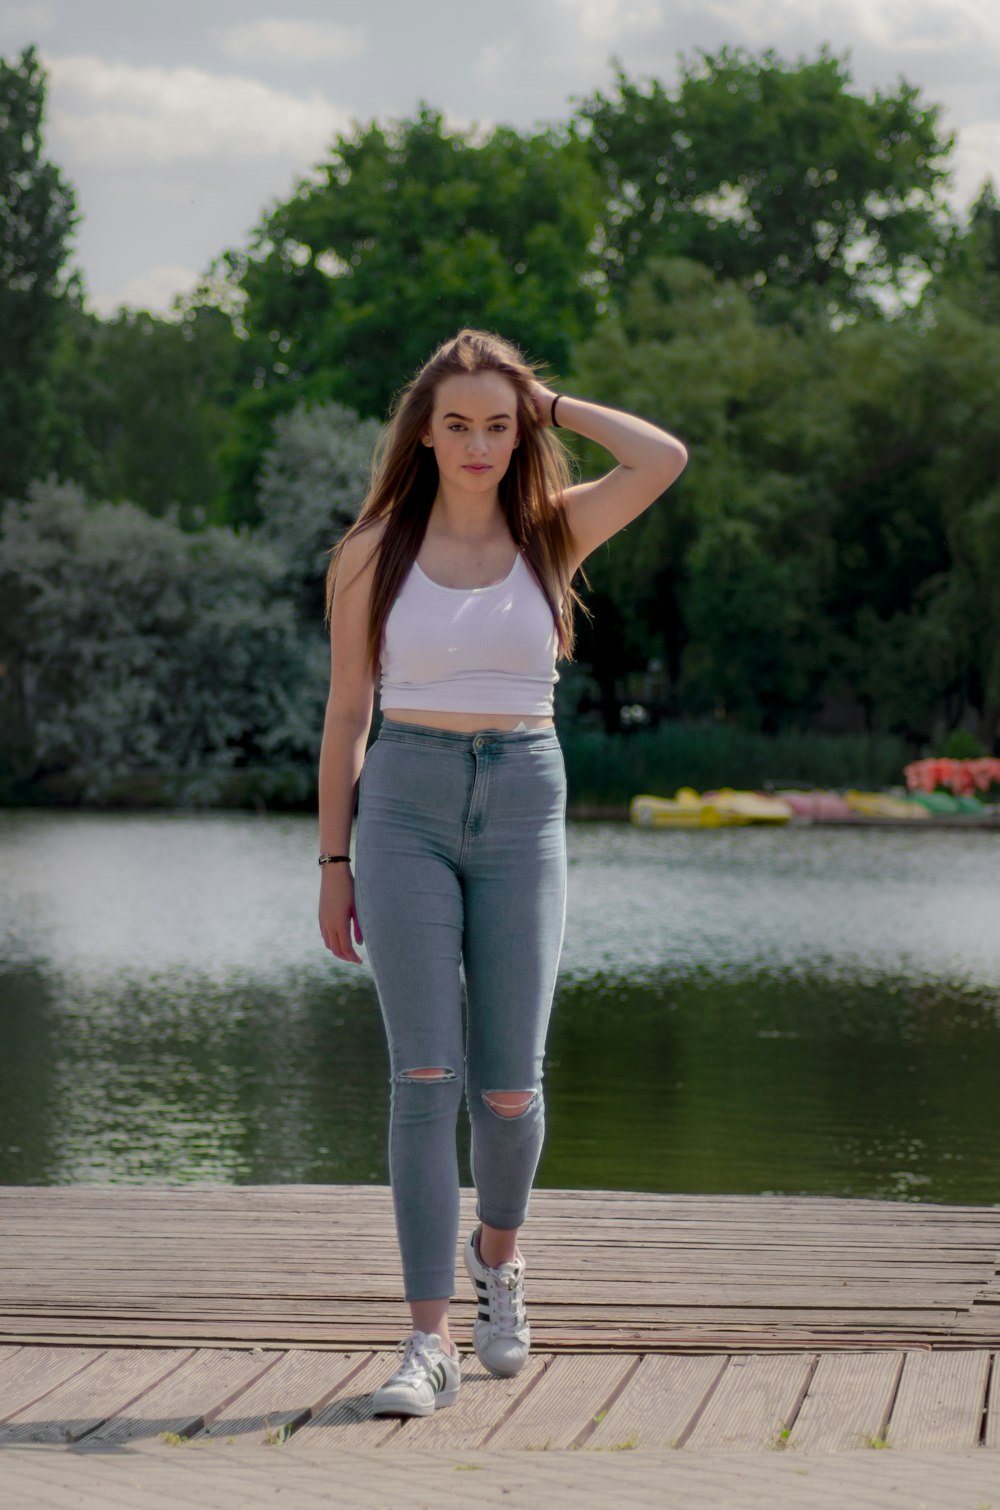 Woman in white tank top and blue denim jeans standing on wooden dock during  daytime photo – Free Human Image on Unsplash